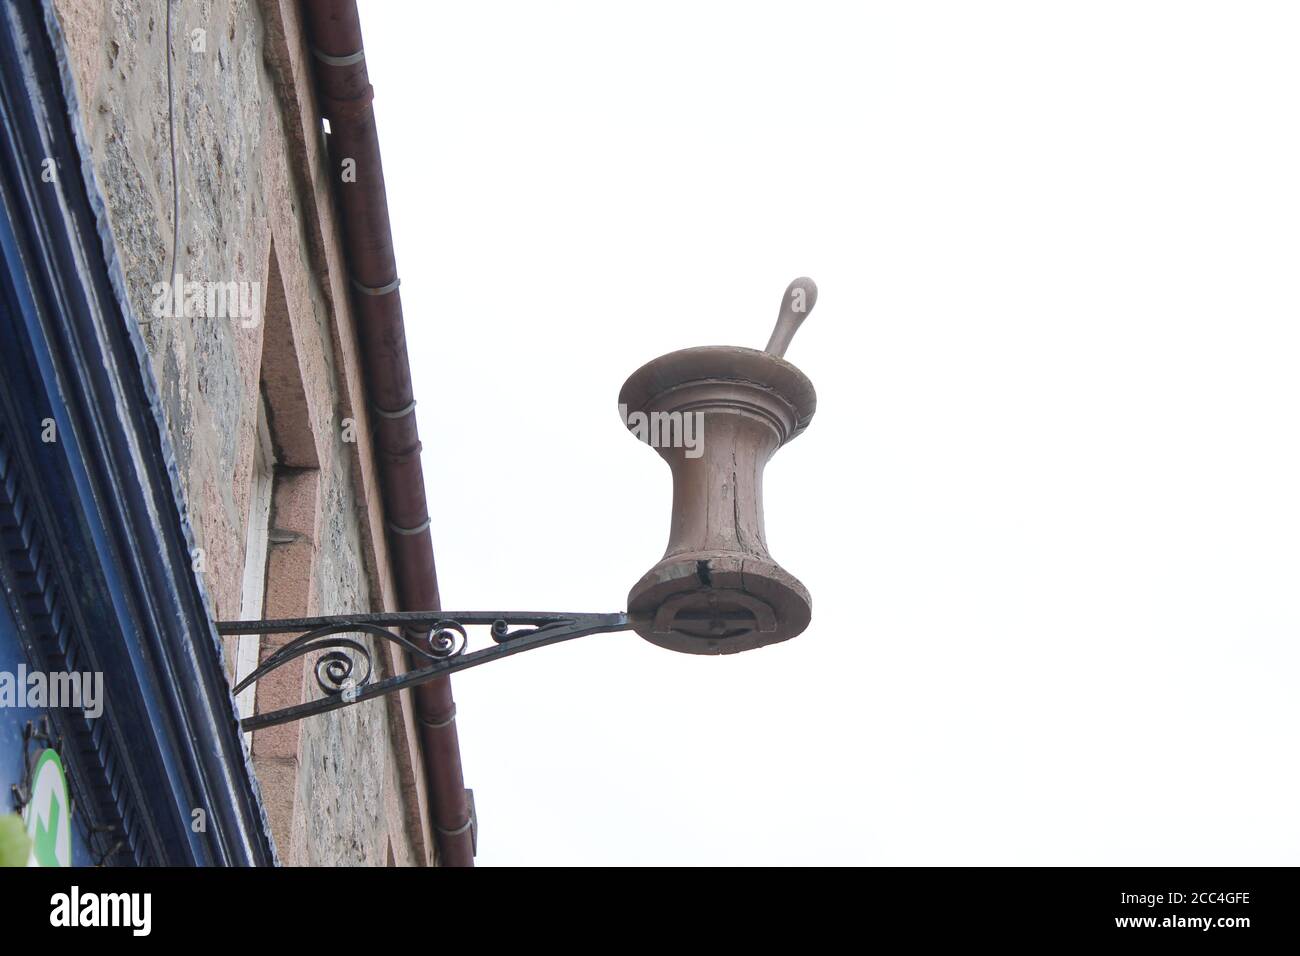 Hanging wooden mortar and pestle high up on pharmacy building, with copy space Stock Photo